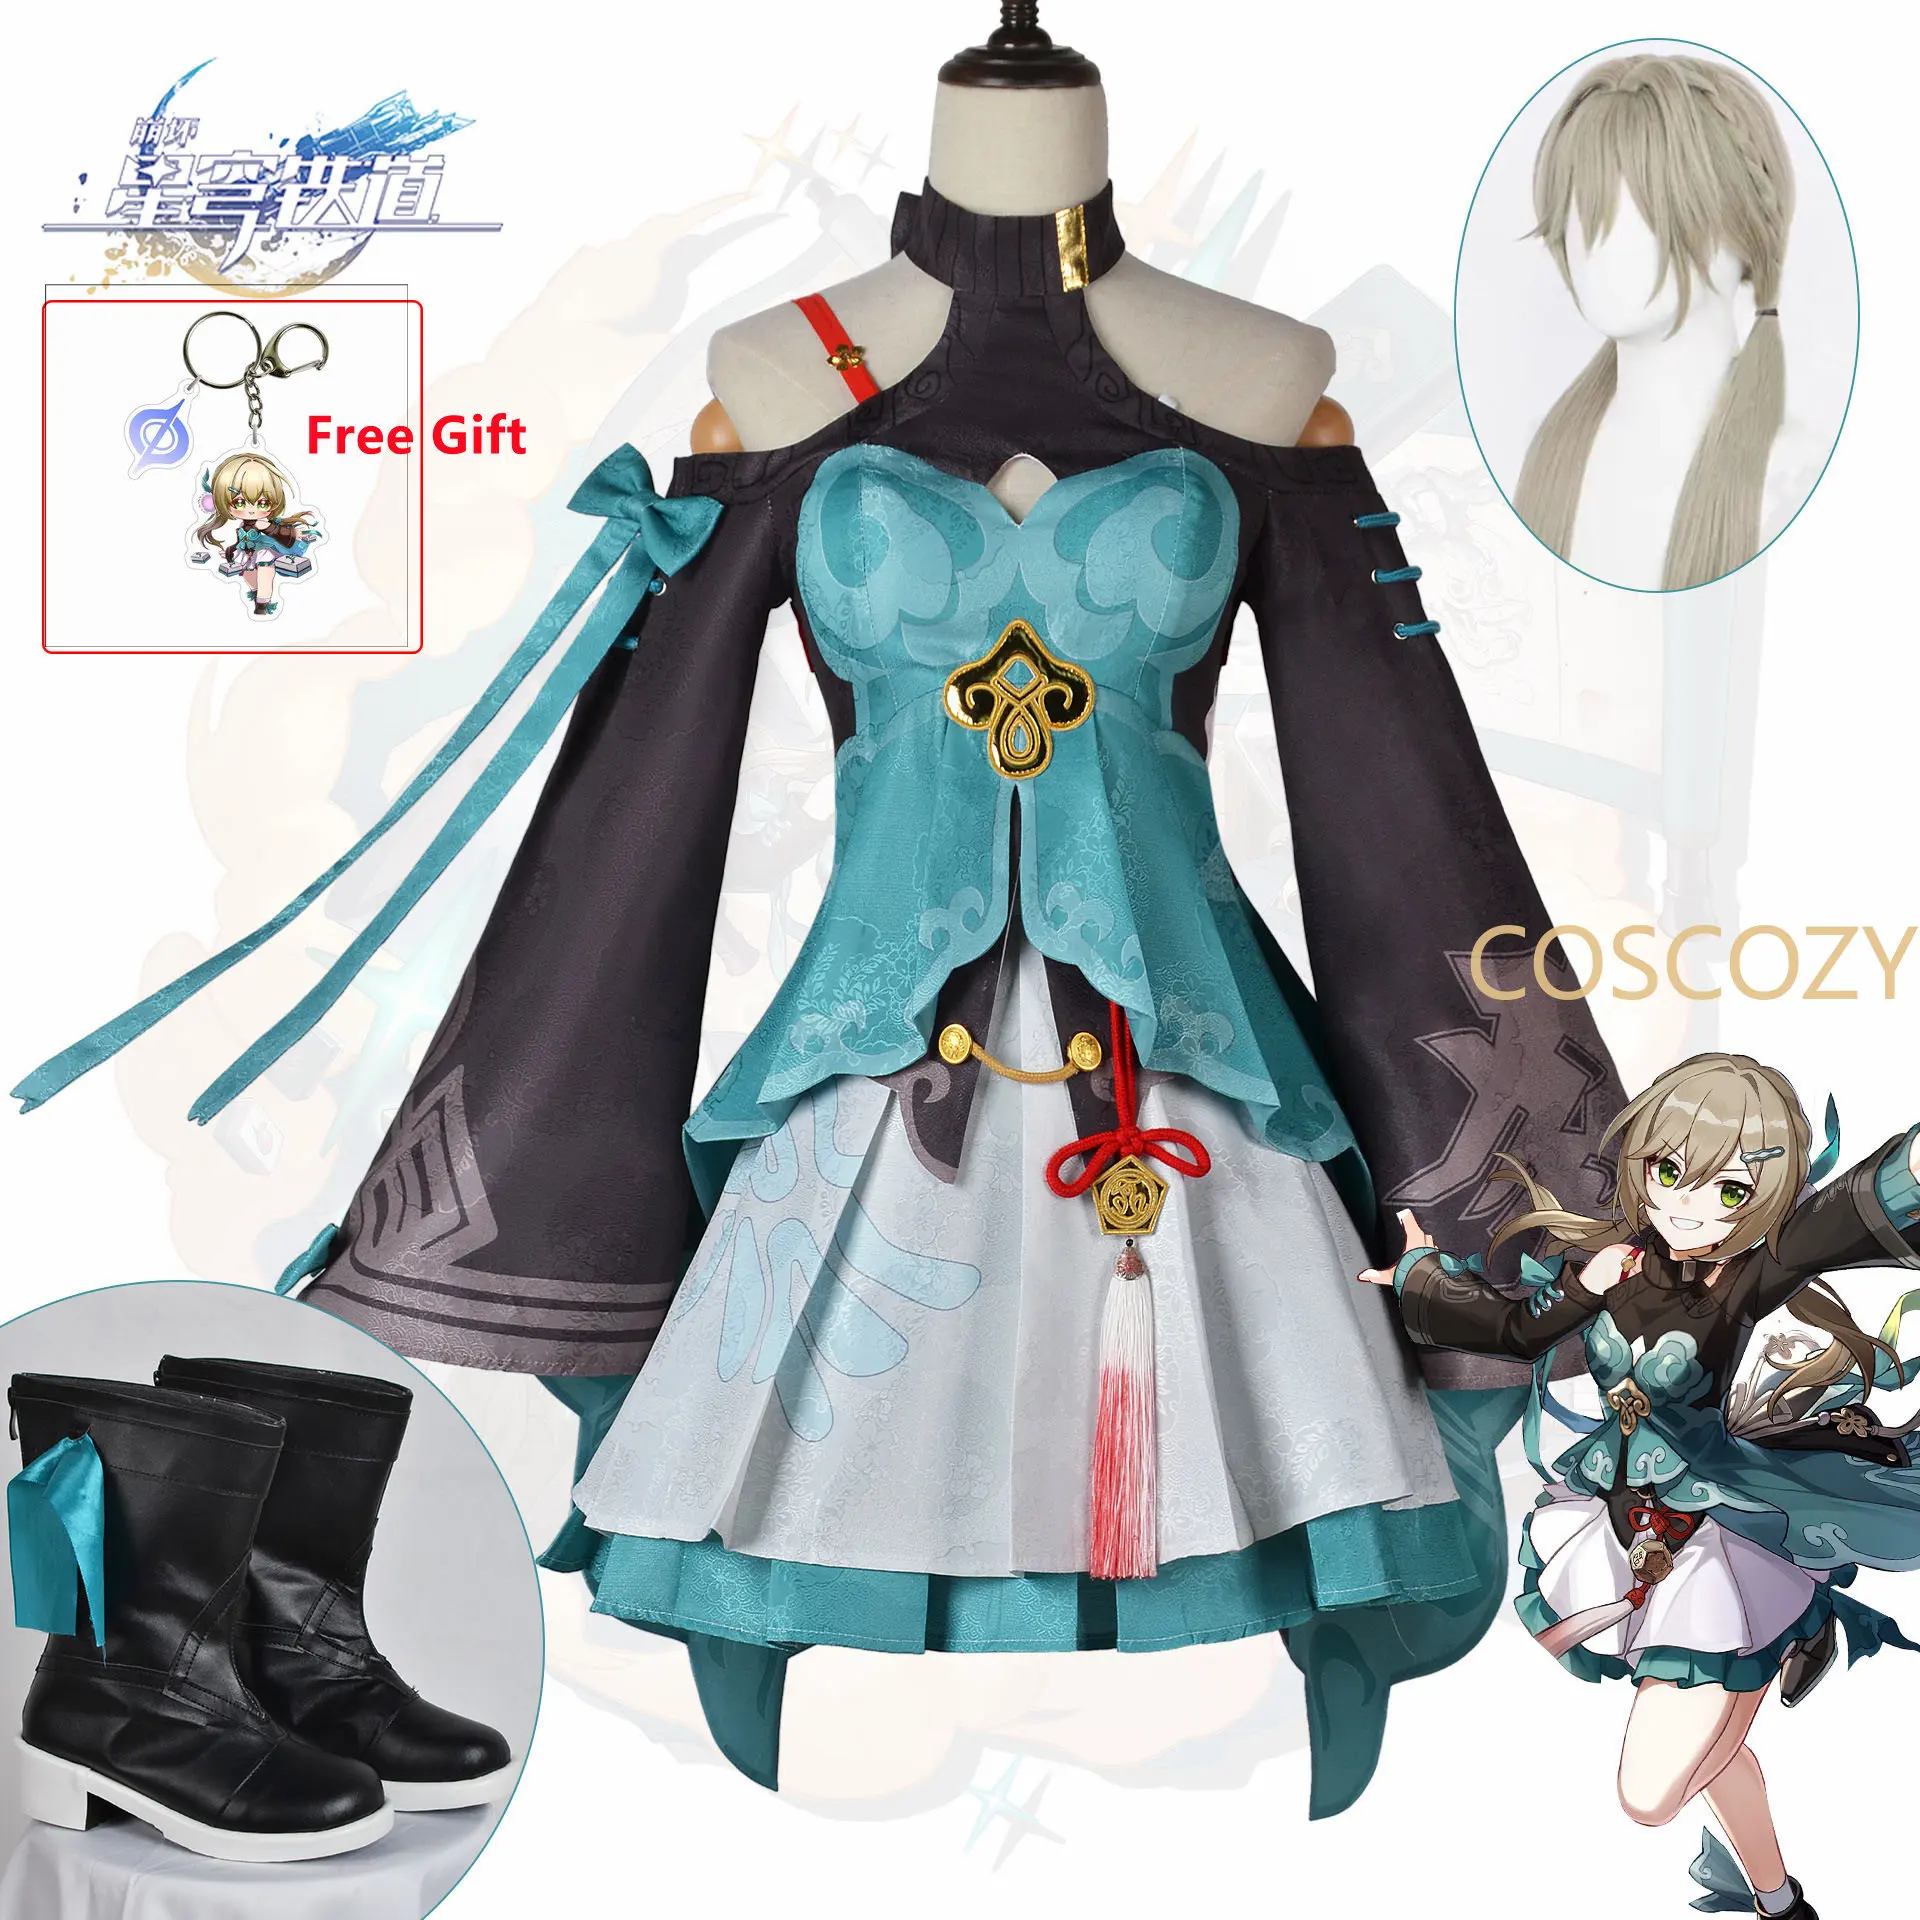 

Game Honkai Star Rail Qingque Cosplay Costume Game Honkai Star Rail Cosplay Xianzhou Luofu Qing Que Costume and Wig Set